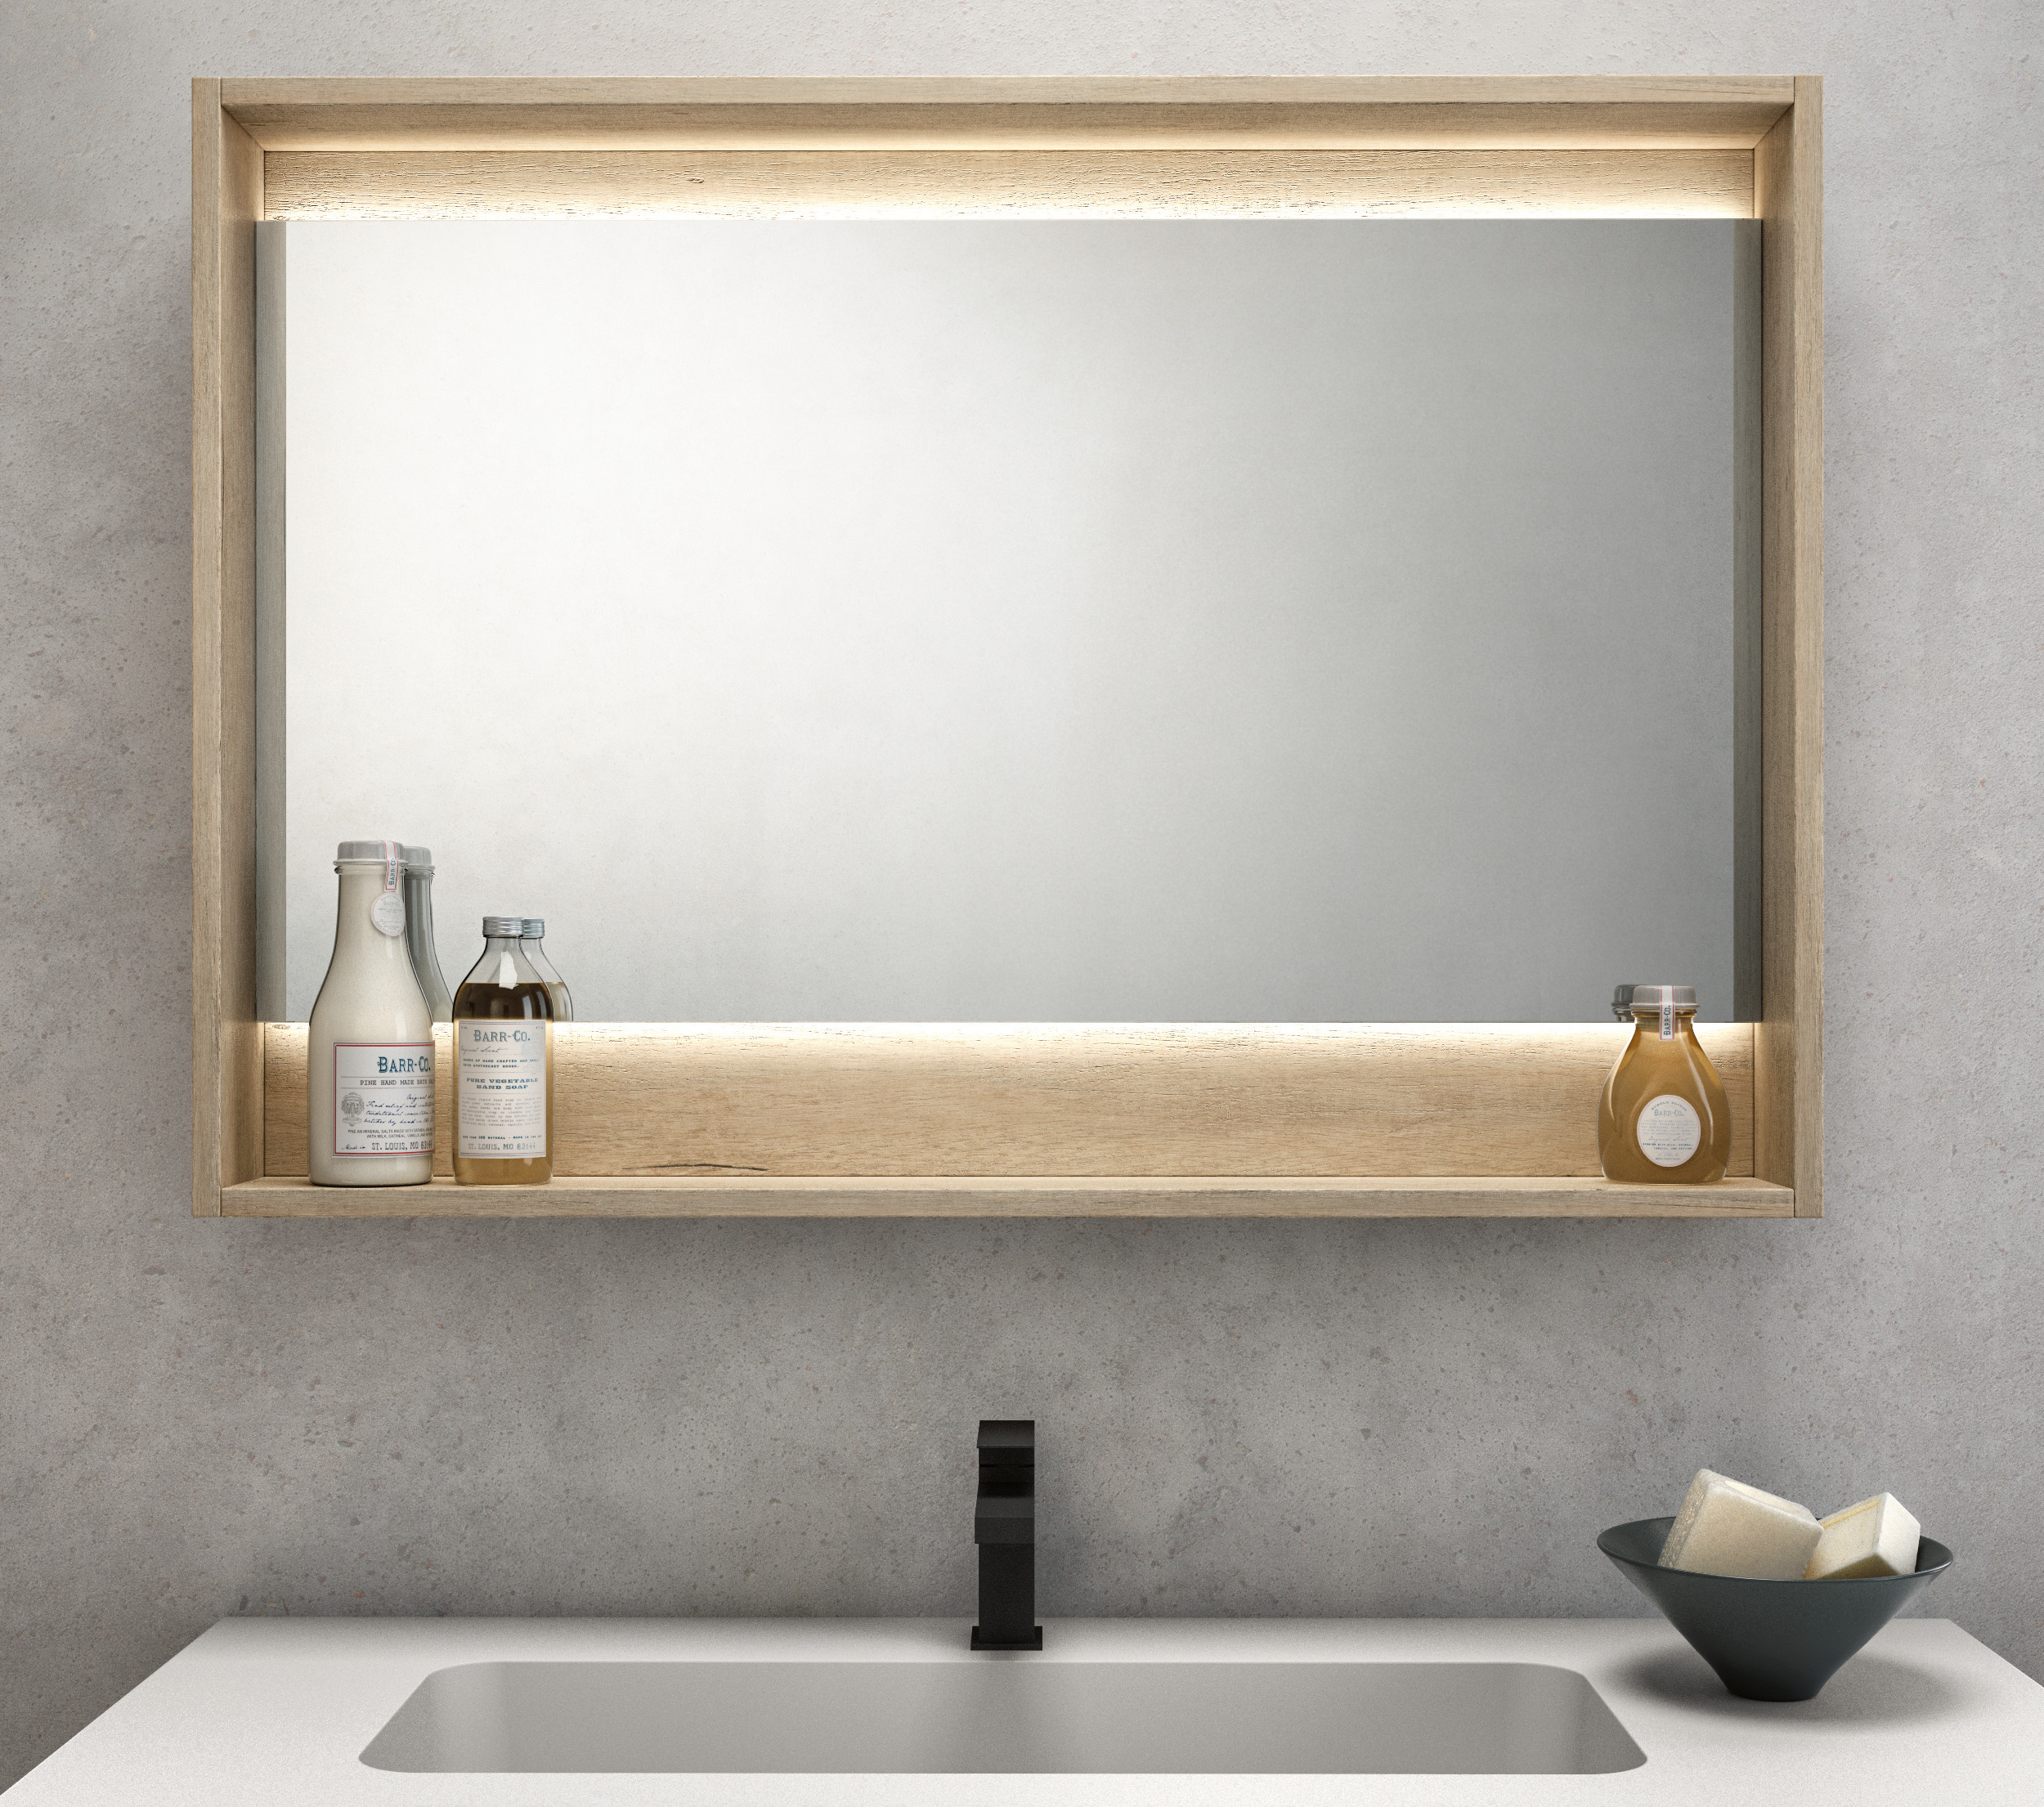 7 Medicine Cabinets That Will Upgrade, Medicine Cabinet Mirrors For Bathrooms